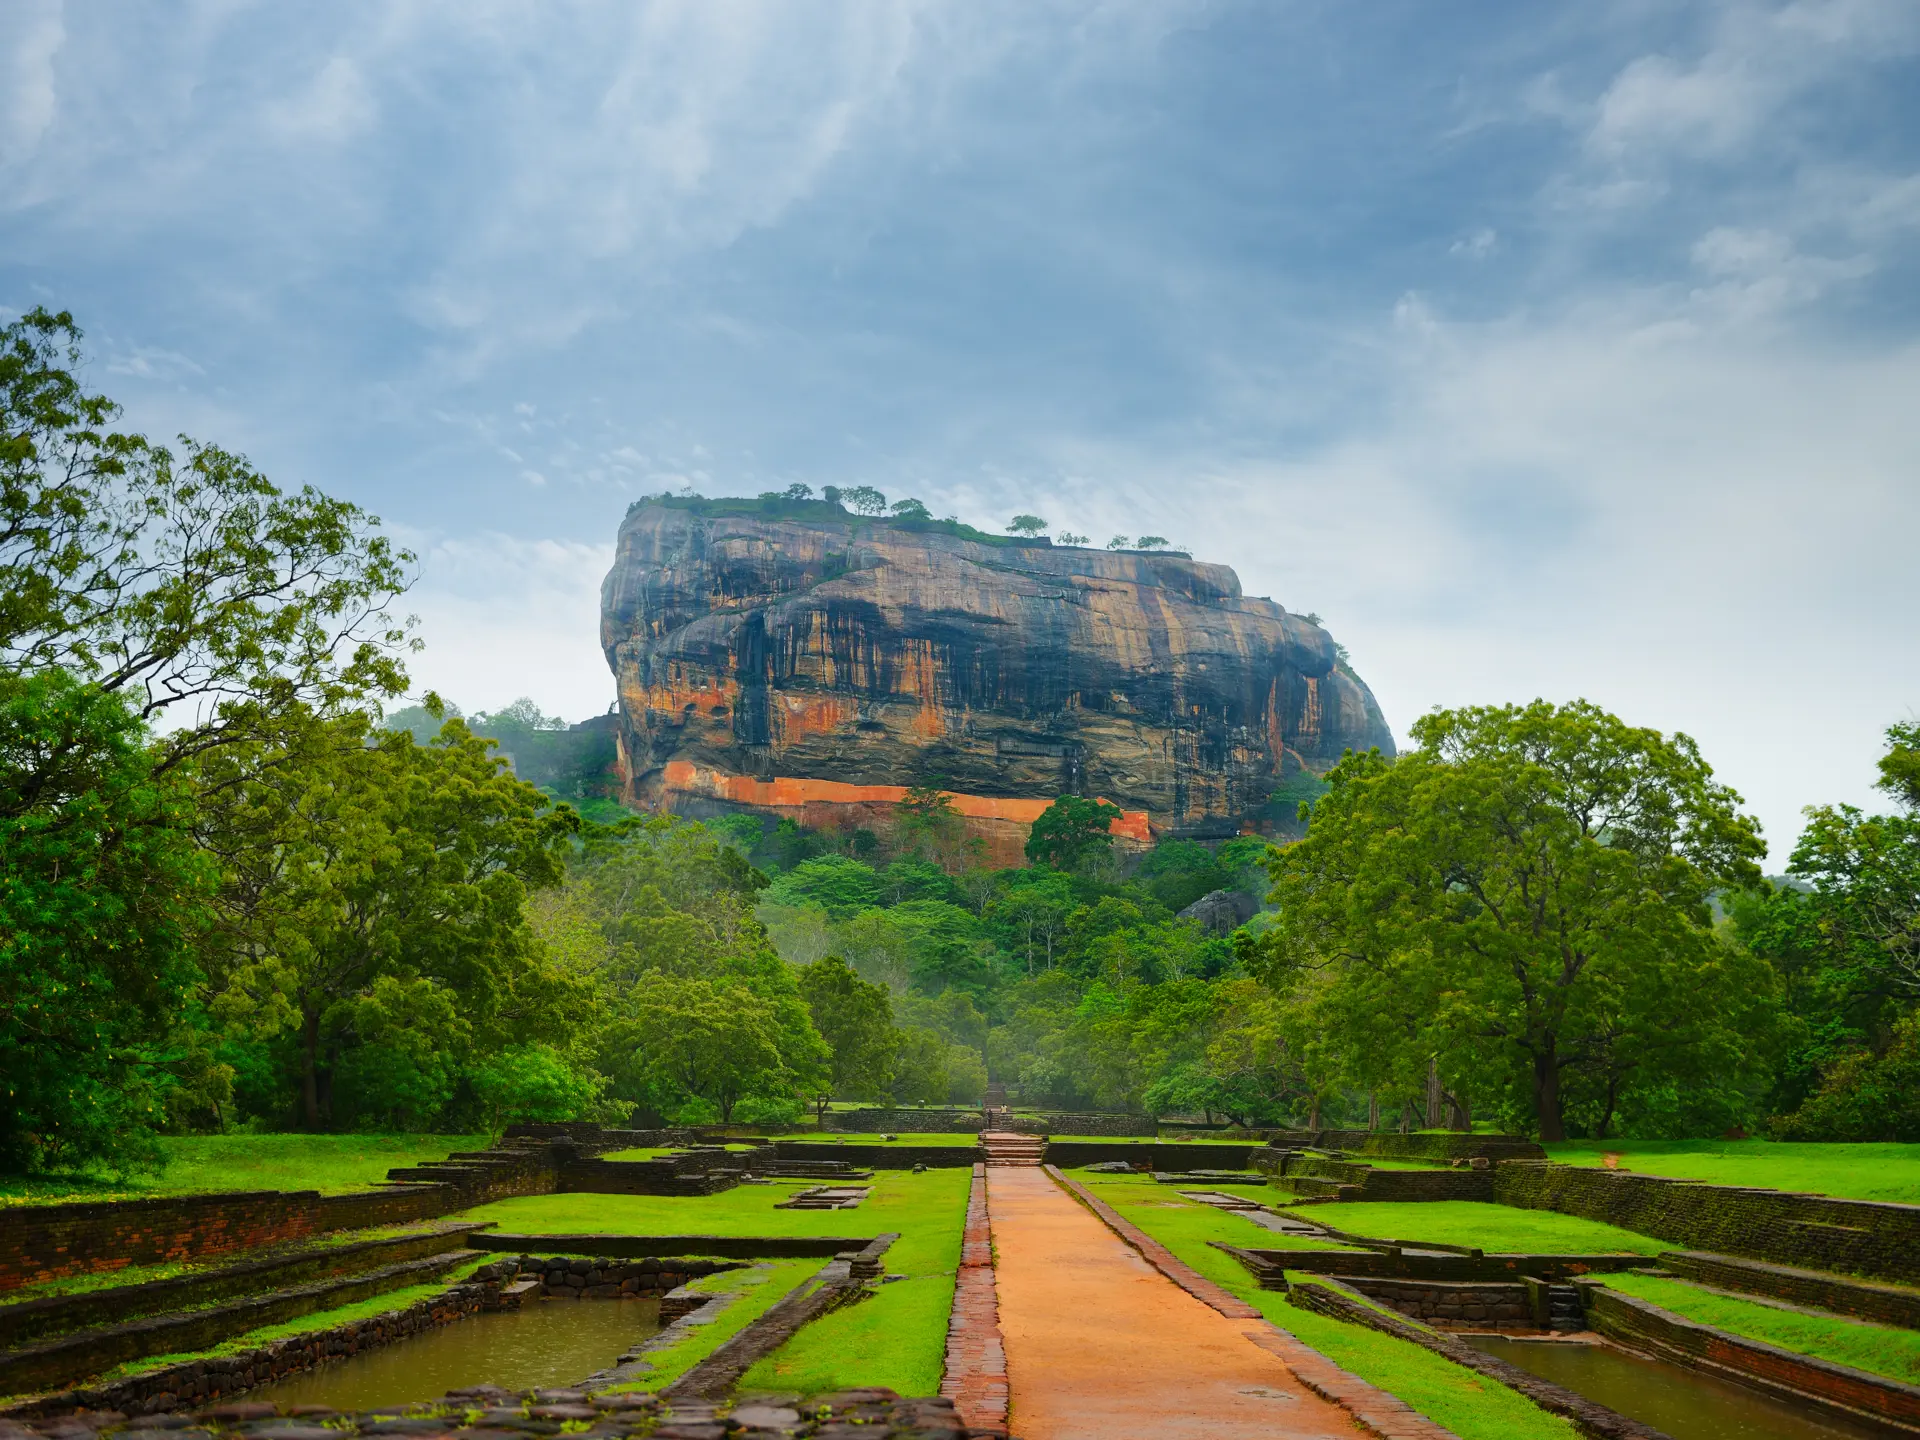 Sigiriya. Lion's rock. Place with a large stone and ancient rock fortress and palace ruin_124569751.jpg